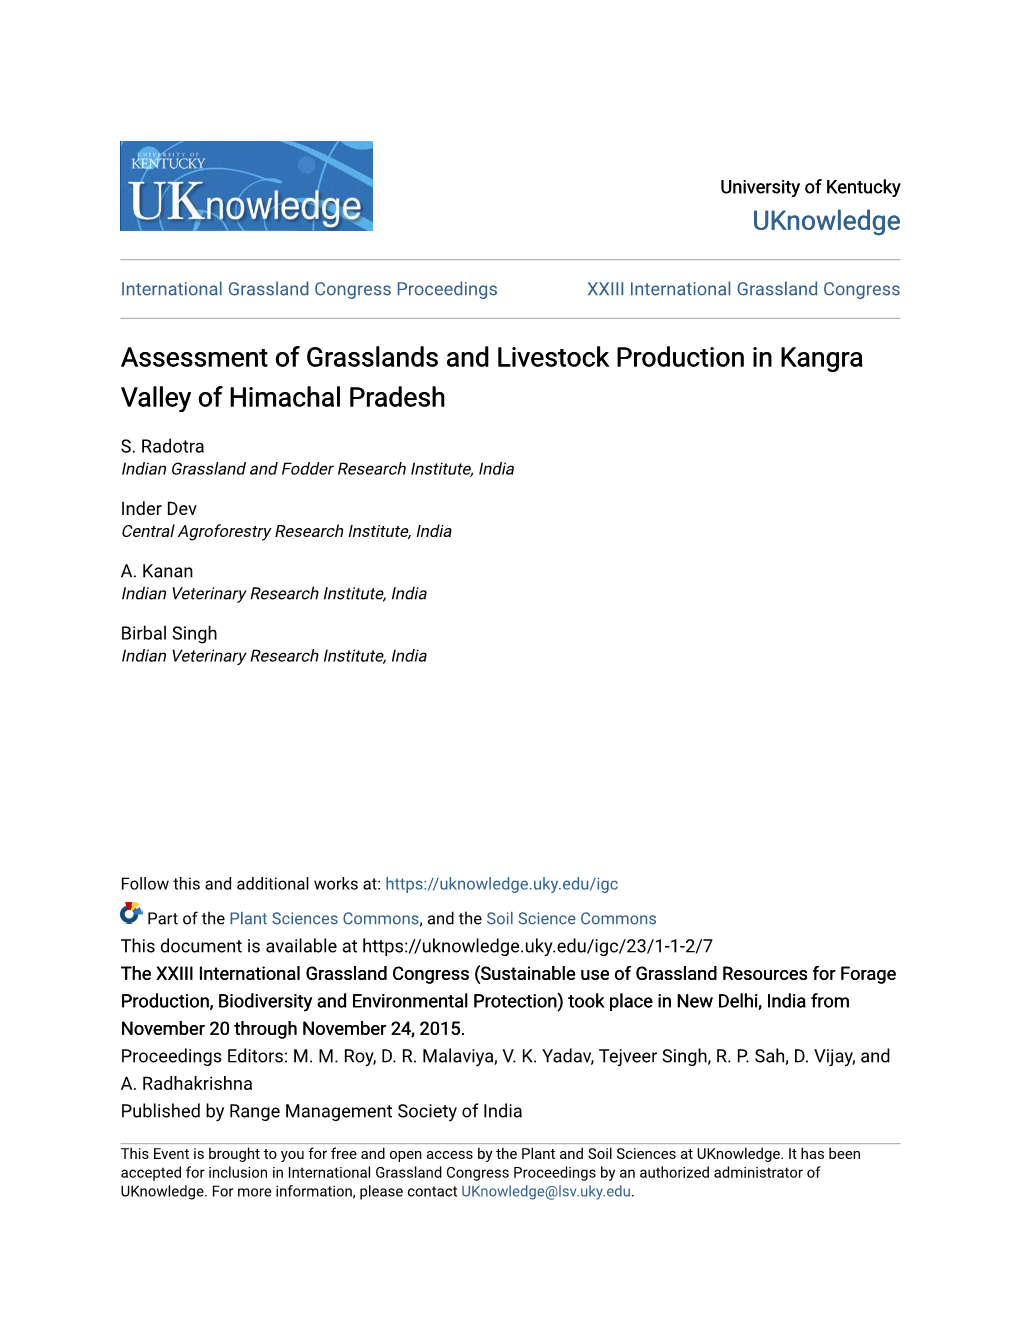 Assessment of Grasslands and Livestock Production in Kangra Valley of Himachal Pradesh